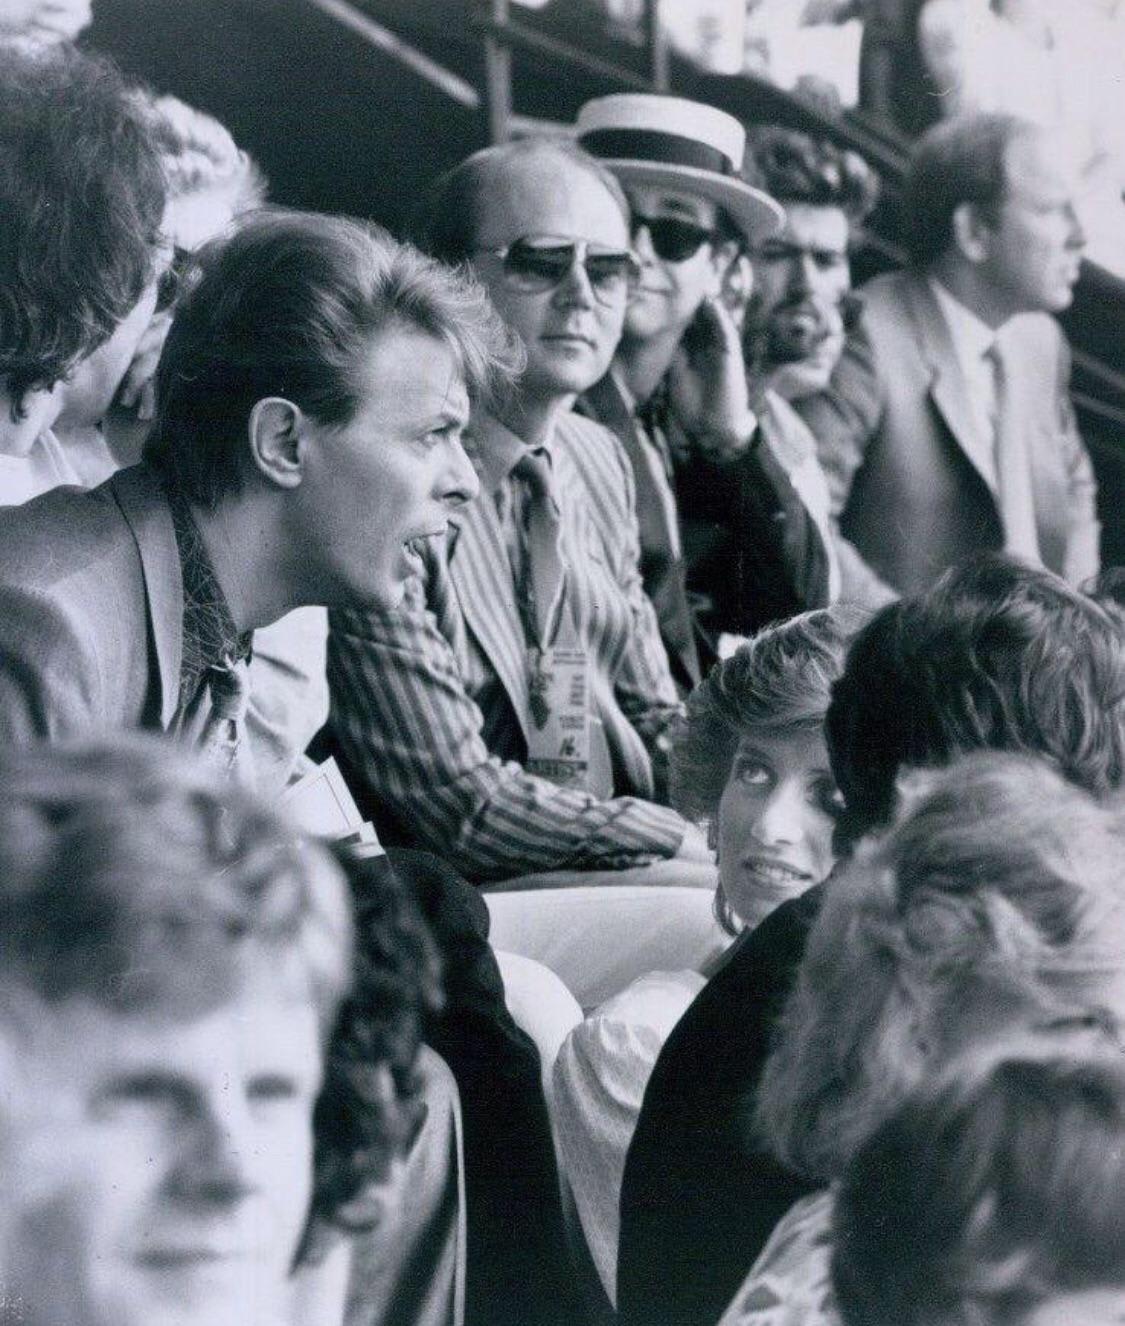 David Bowie chatting with Princess Diana at Live Aid concert in 1985